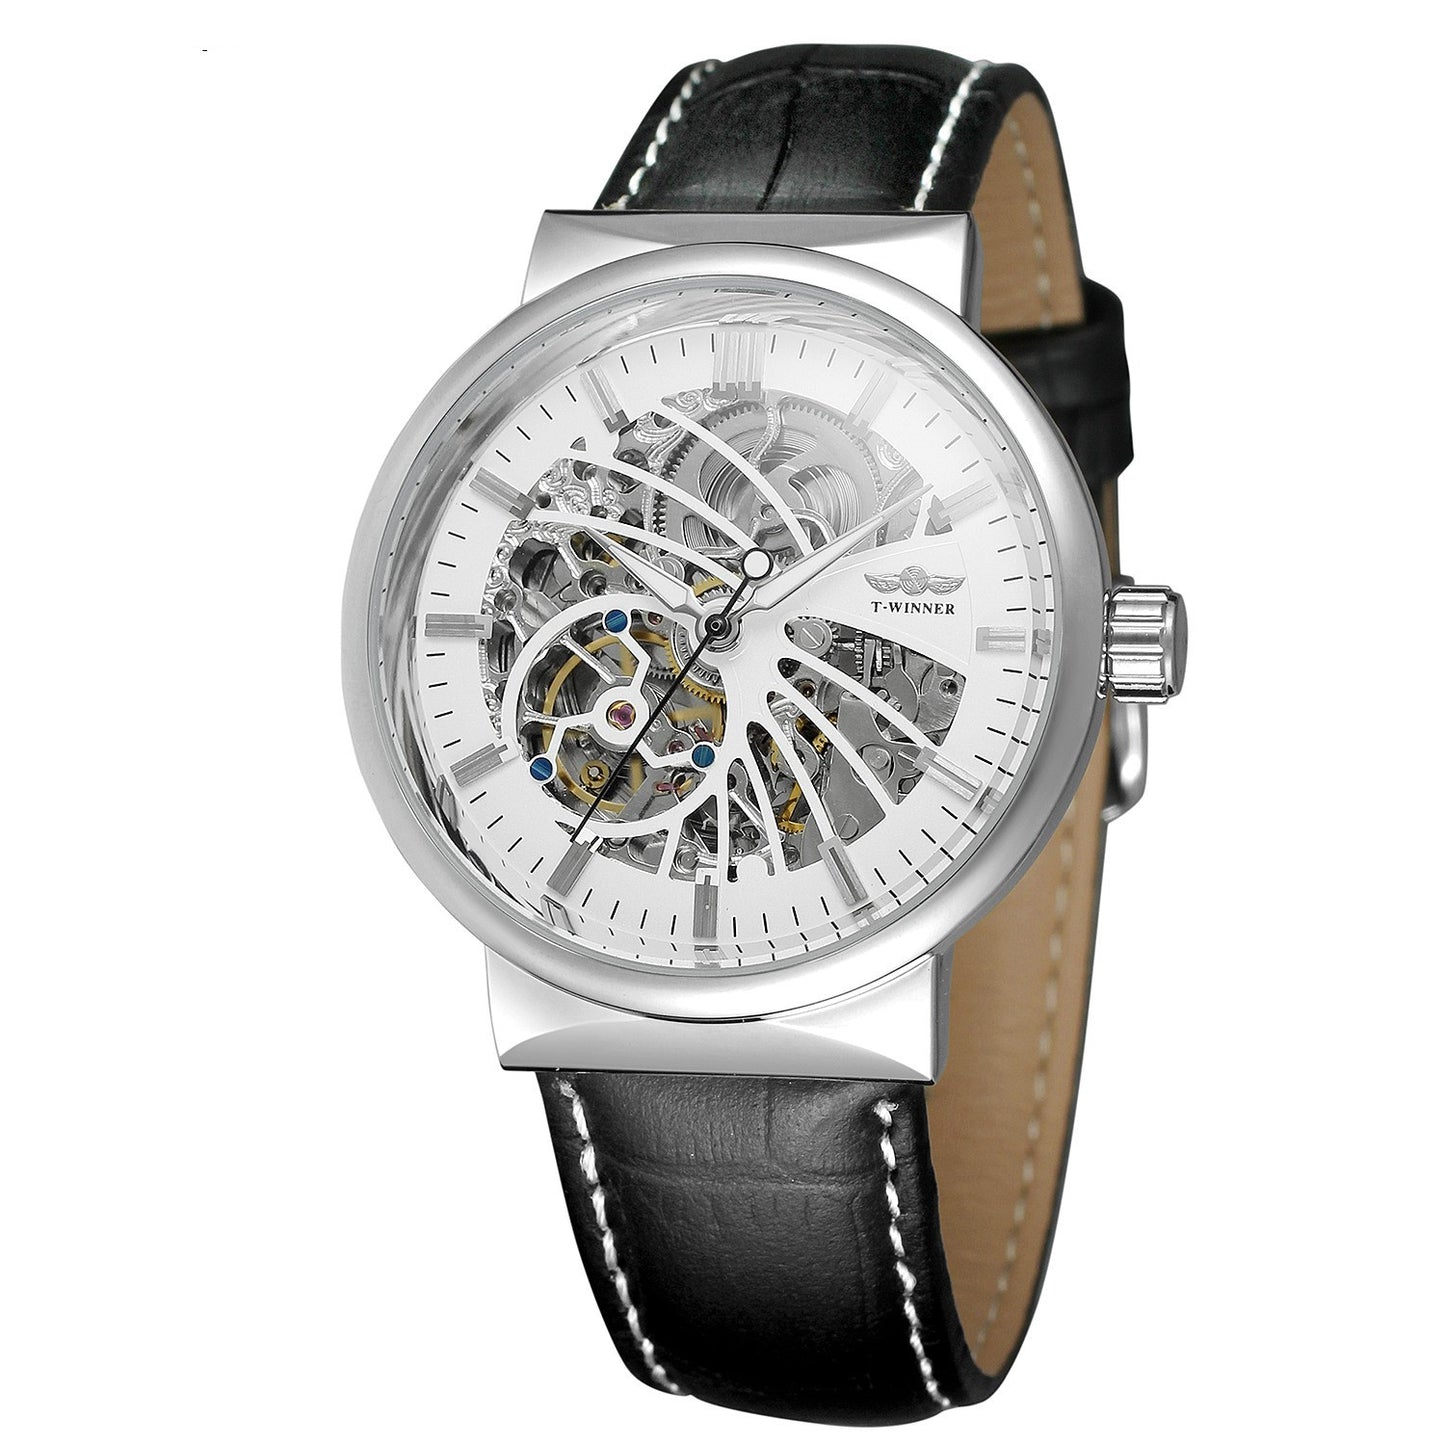 Fully hollow men's automatic mechanical watch